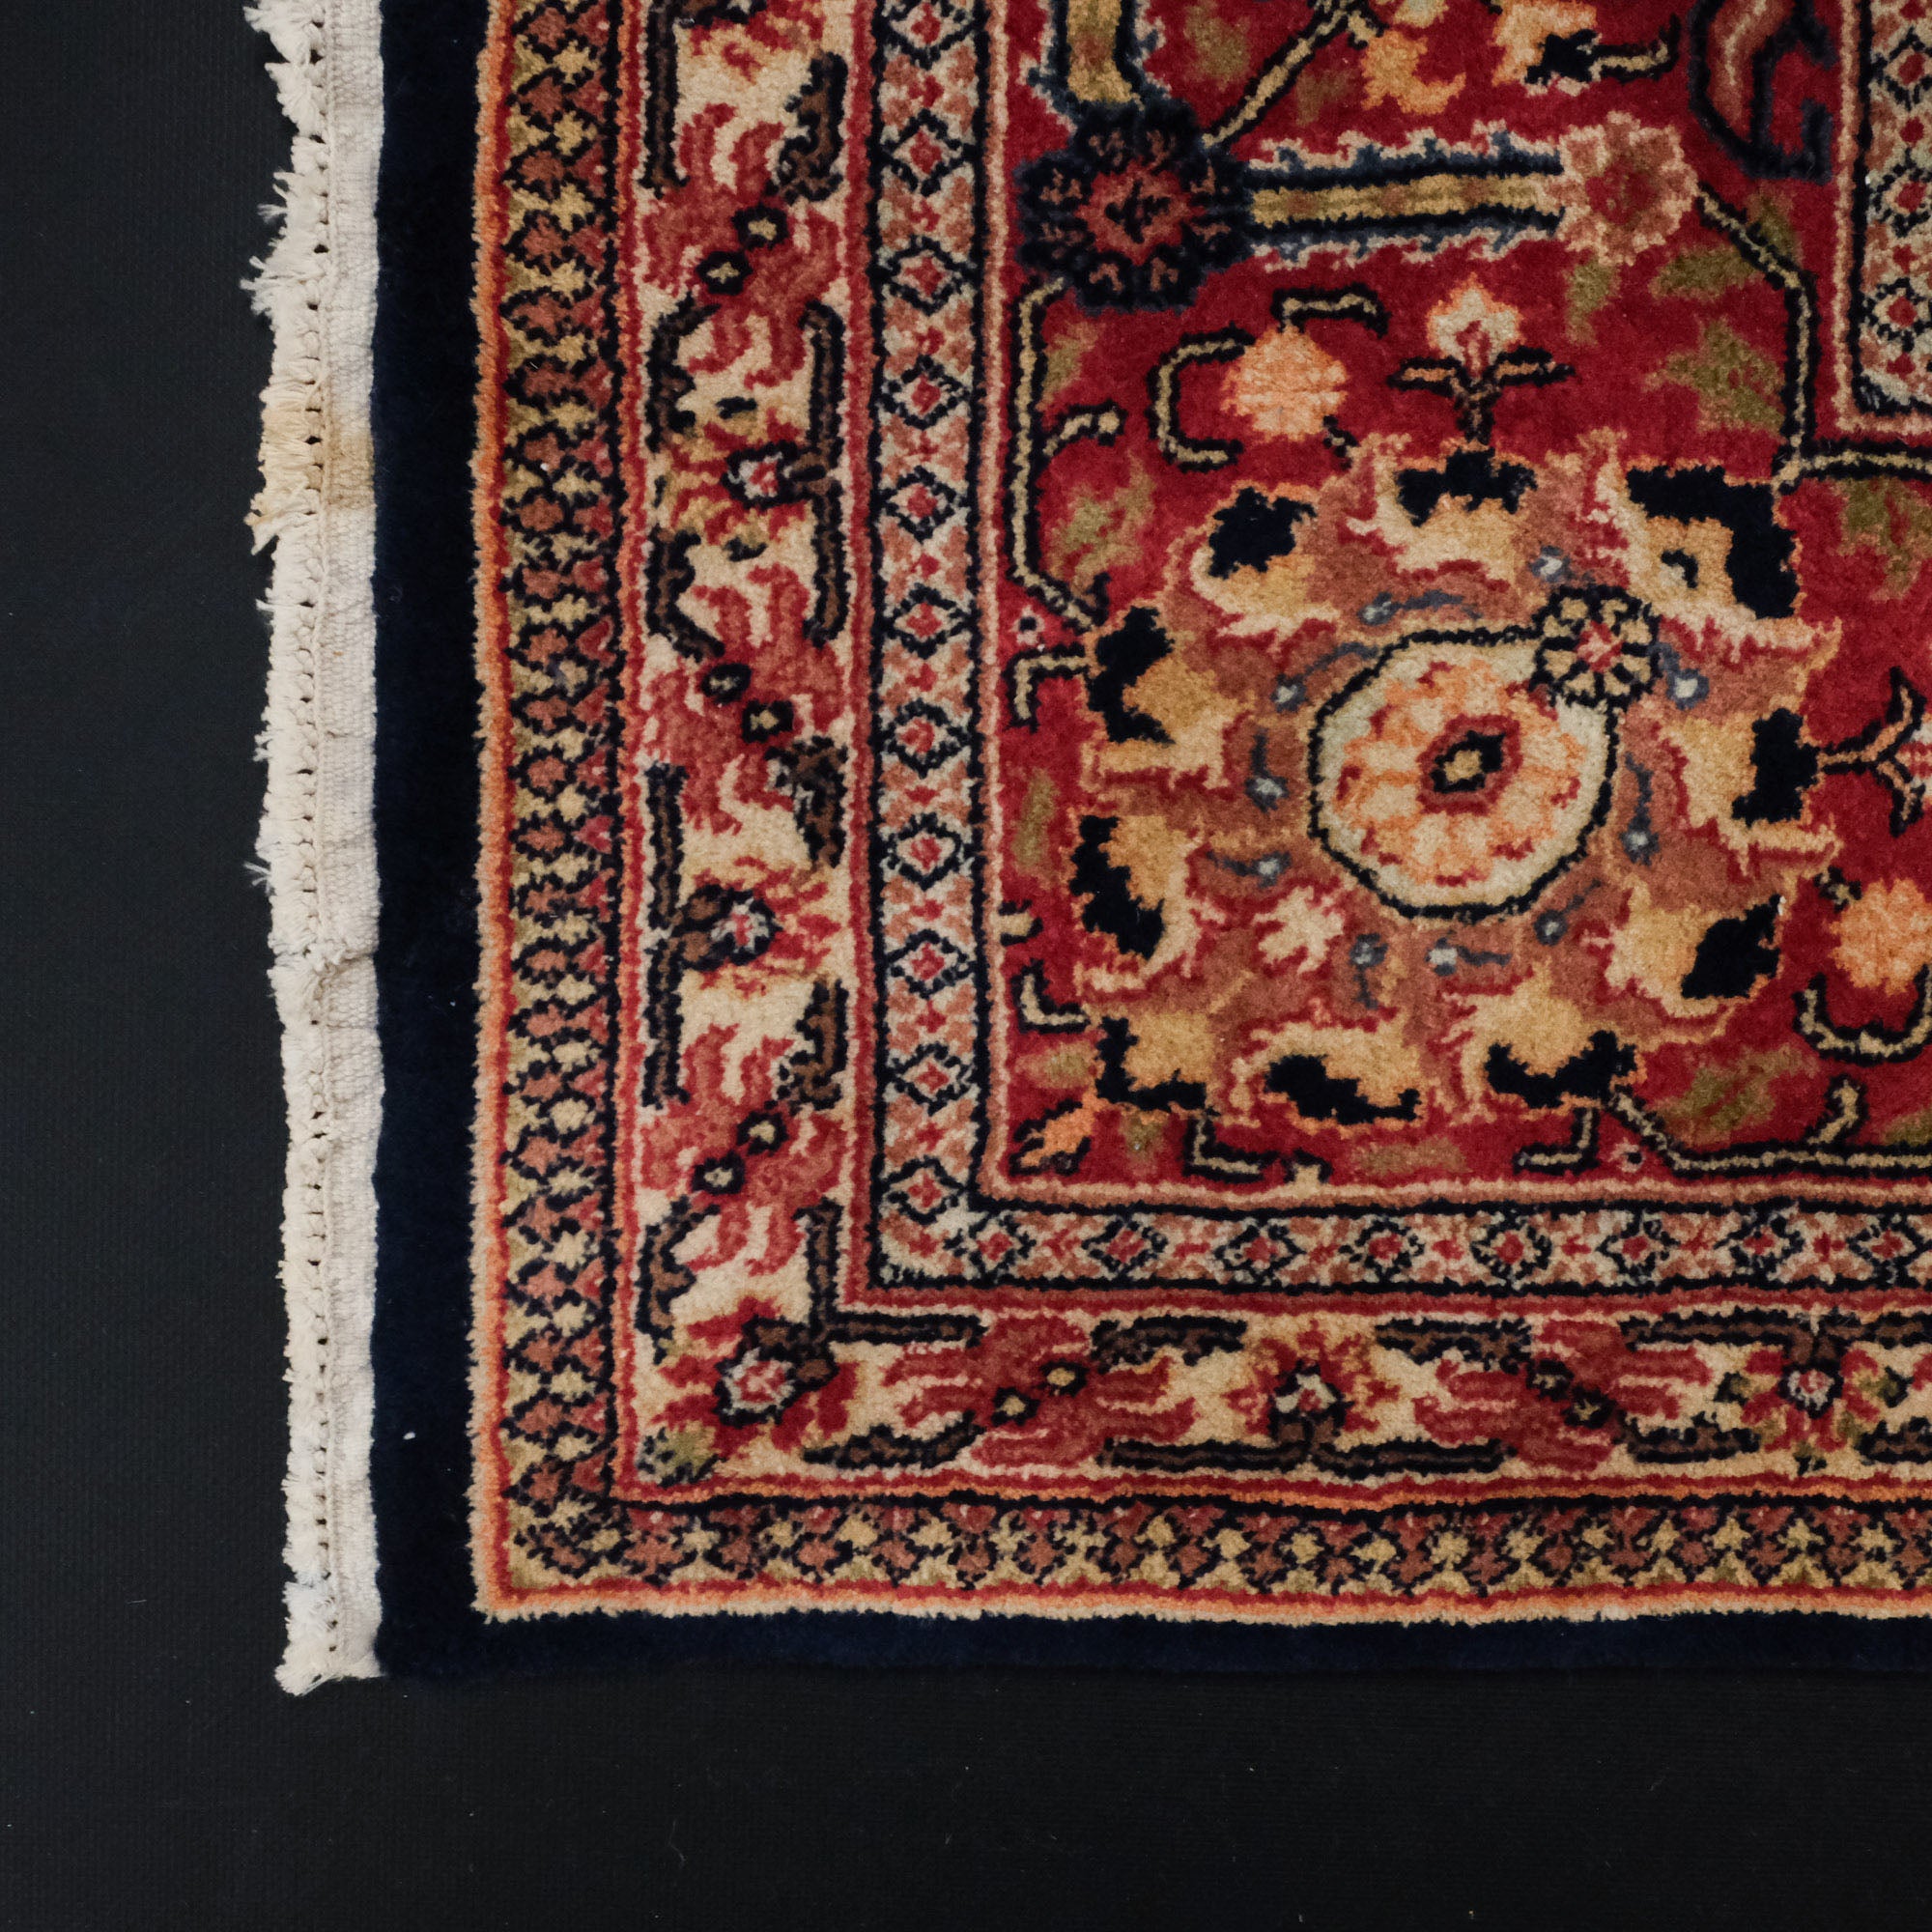 Hand-Woven Floral Patterned Colorful Iranian Bicar Carpet